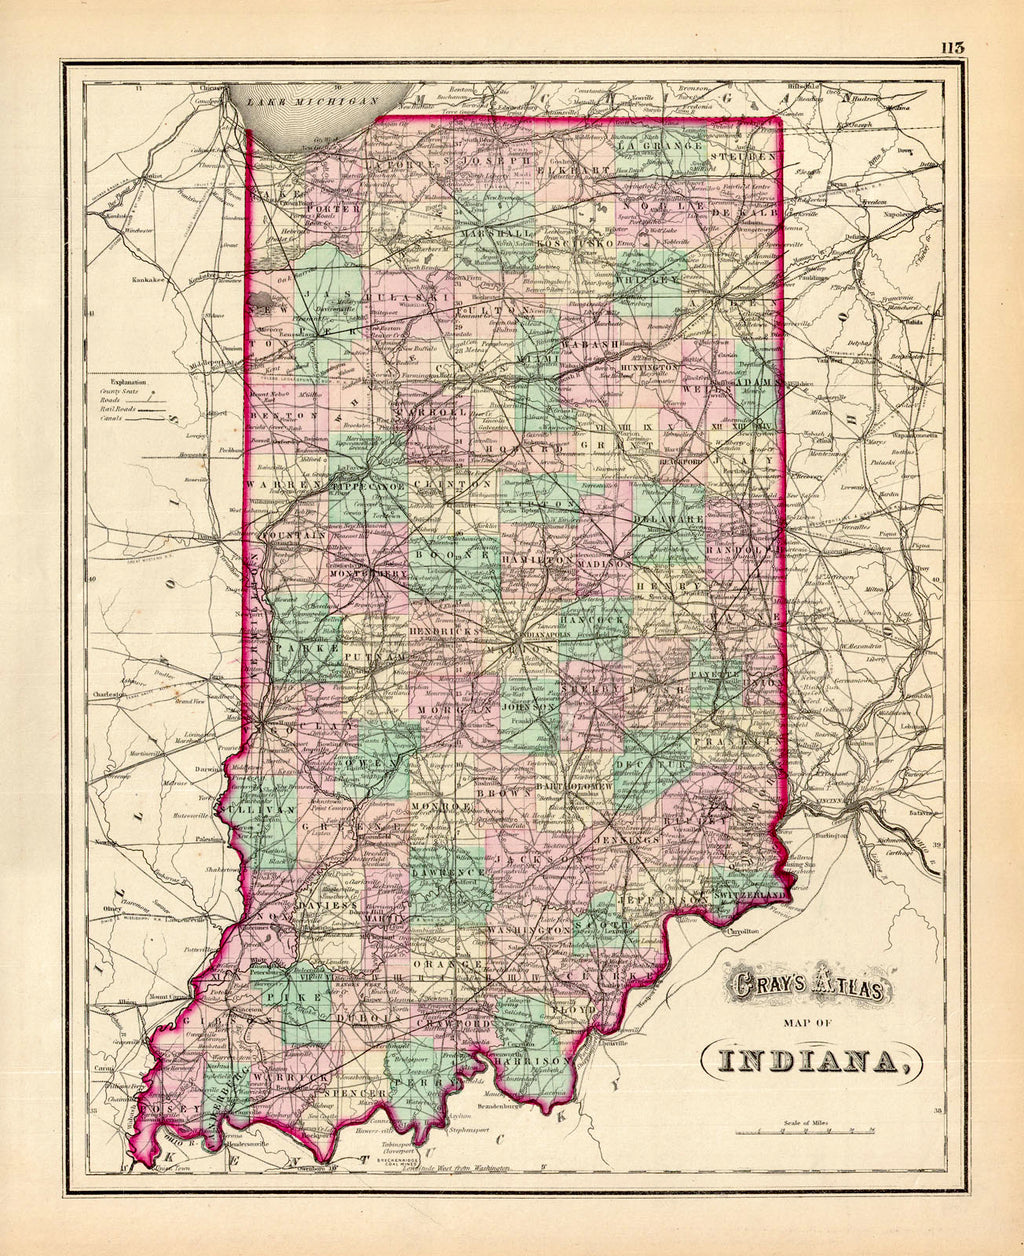 Indiana Gray, 1874 What had been a mostly vacant territory six decades prior, is now an active agricultural state. With railroads crossing through every county multiple times, there was infrastructure to connect this growing state with settlement growing northward. Condition is very good. Image size is approximately 15 x 12 (inches)